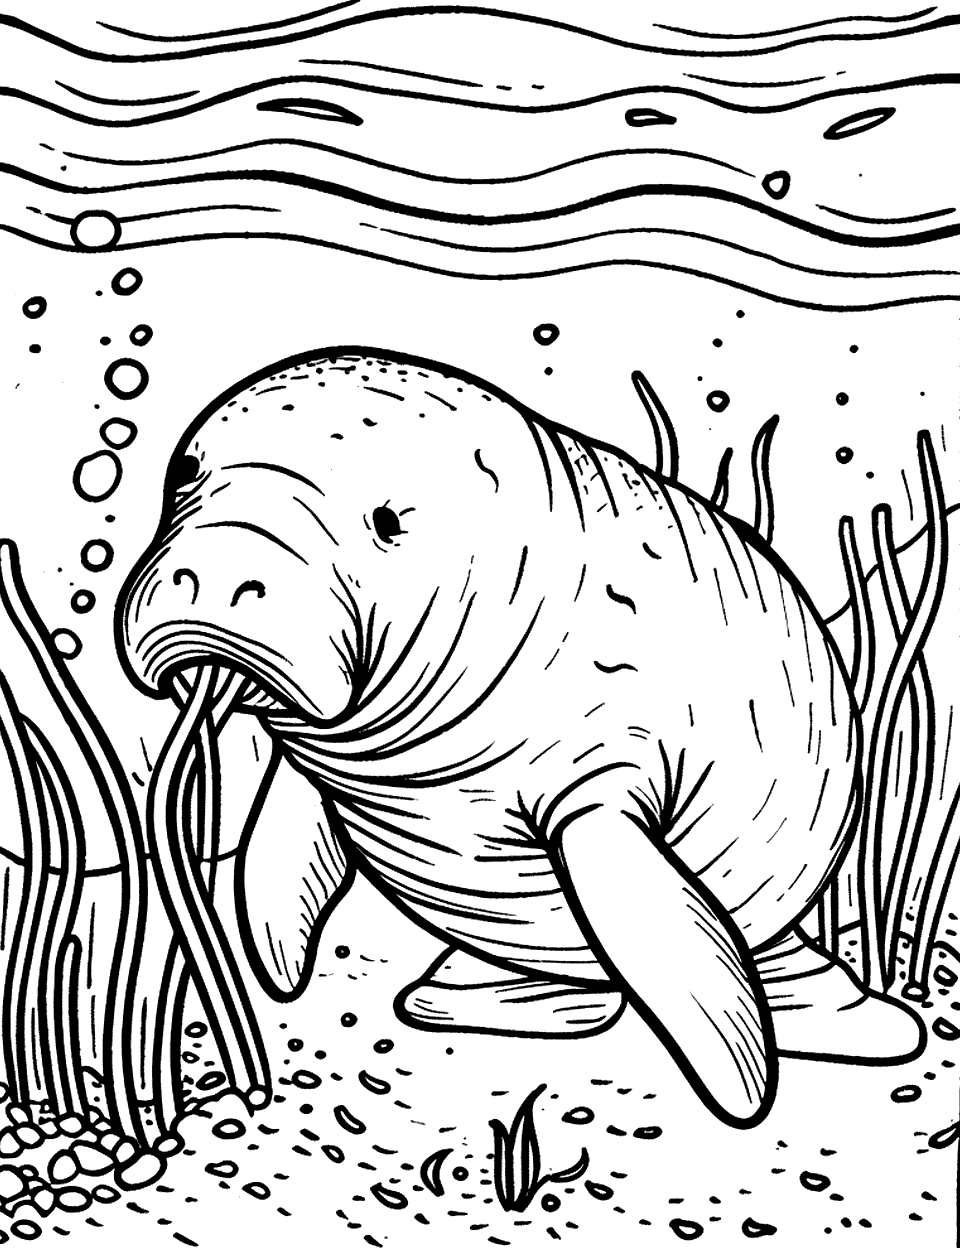 Manatee Munching on Seagrass Sea Creature Coloring Page - A manatee peacefully eats seagrass in a shallow coastal lagoon.